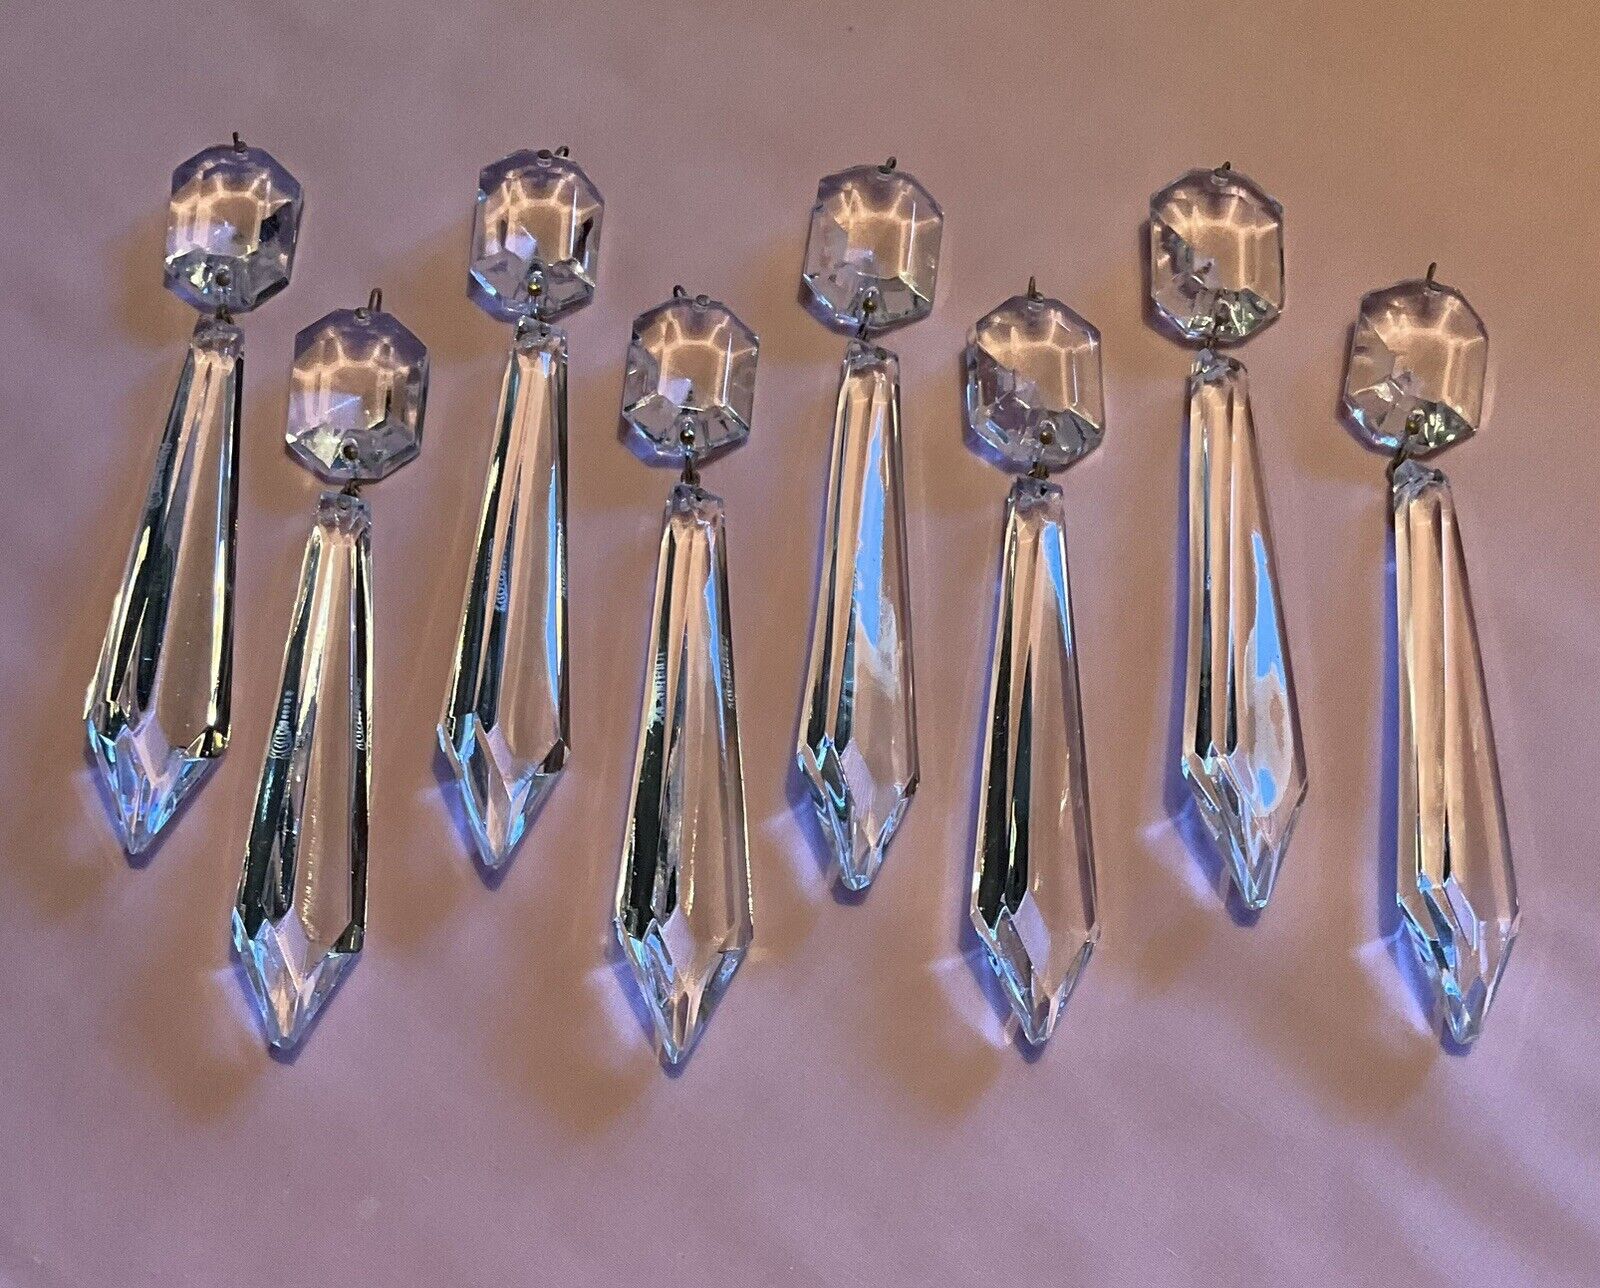 8 Vintage WATERFORD Crystal Prism Drops with Beads/Buttons, 5 3/8”, V Good Cond.